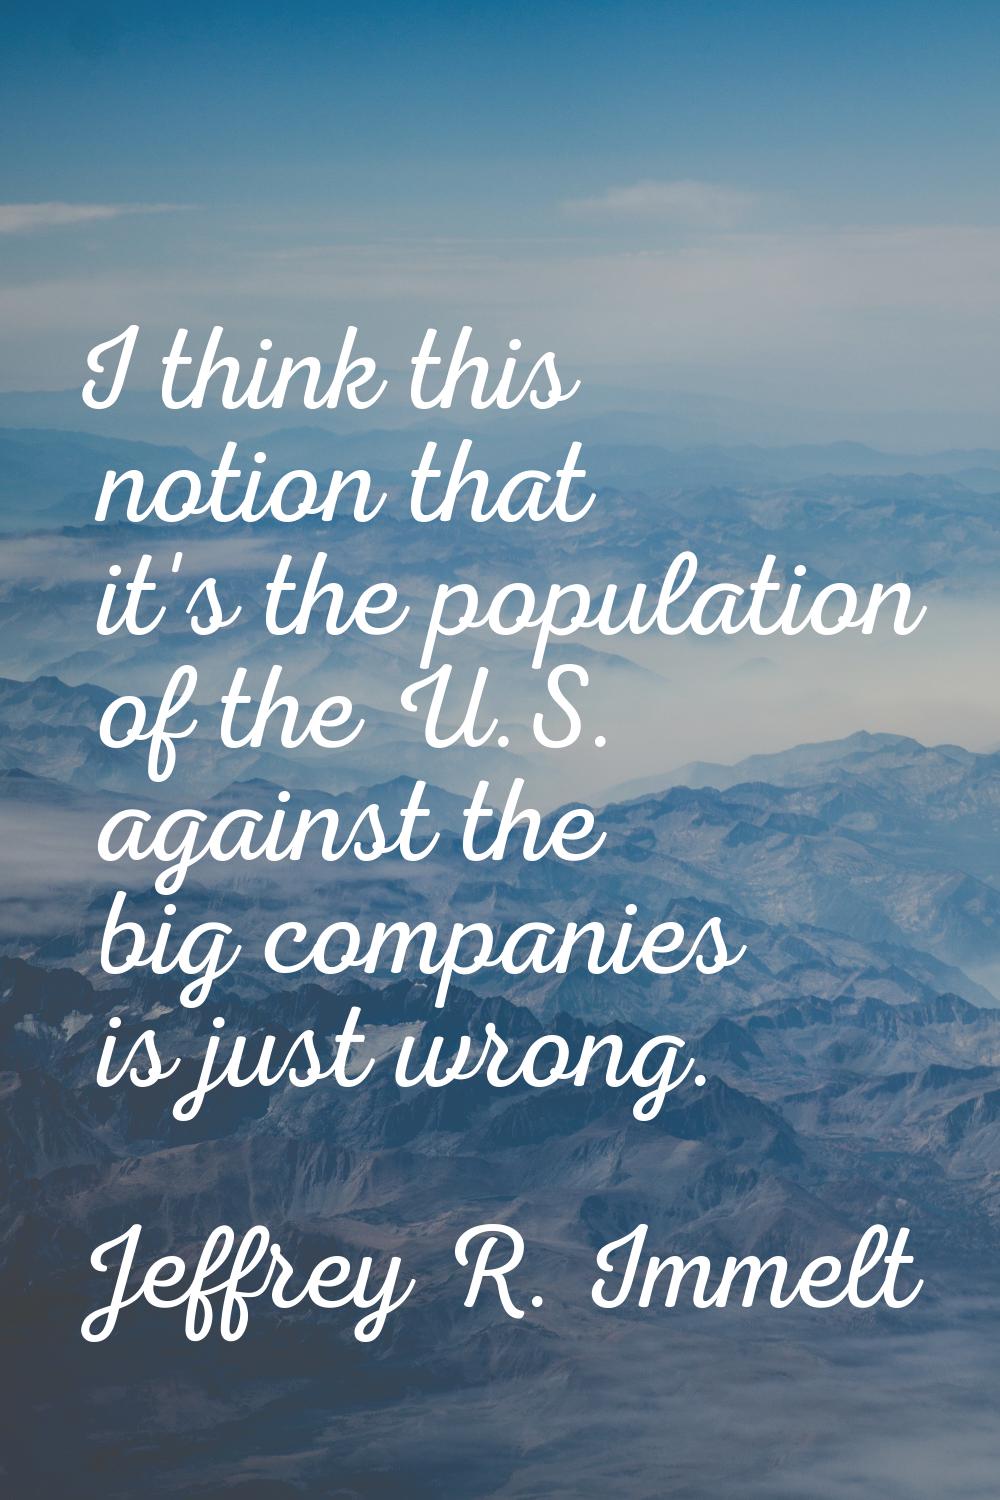 I think this notion that it's the population of the U.S. against the big companies is just wrong.